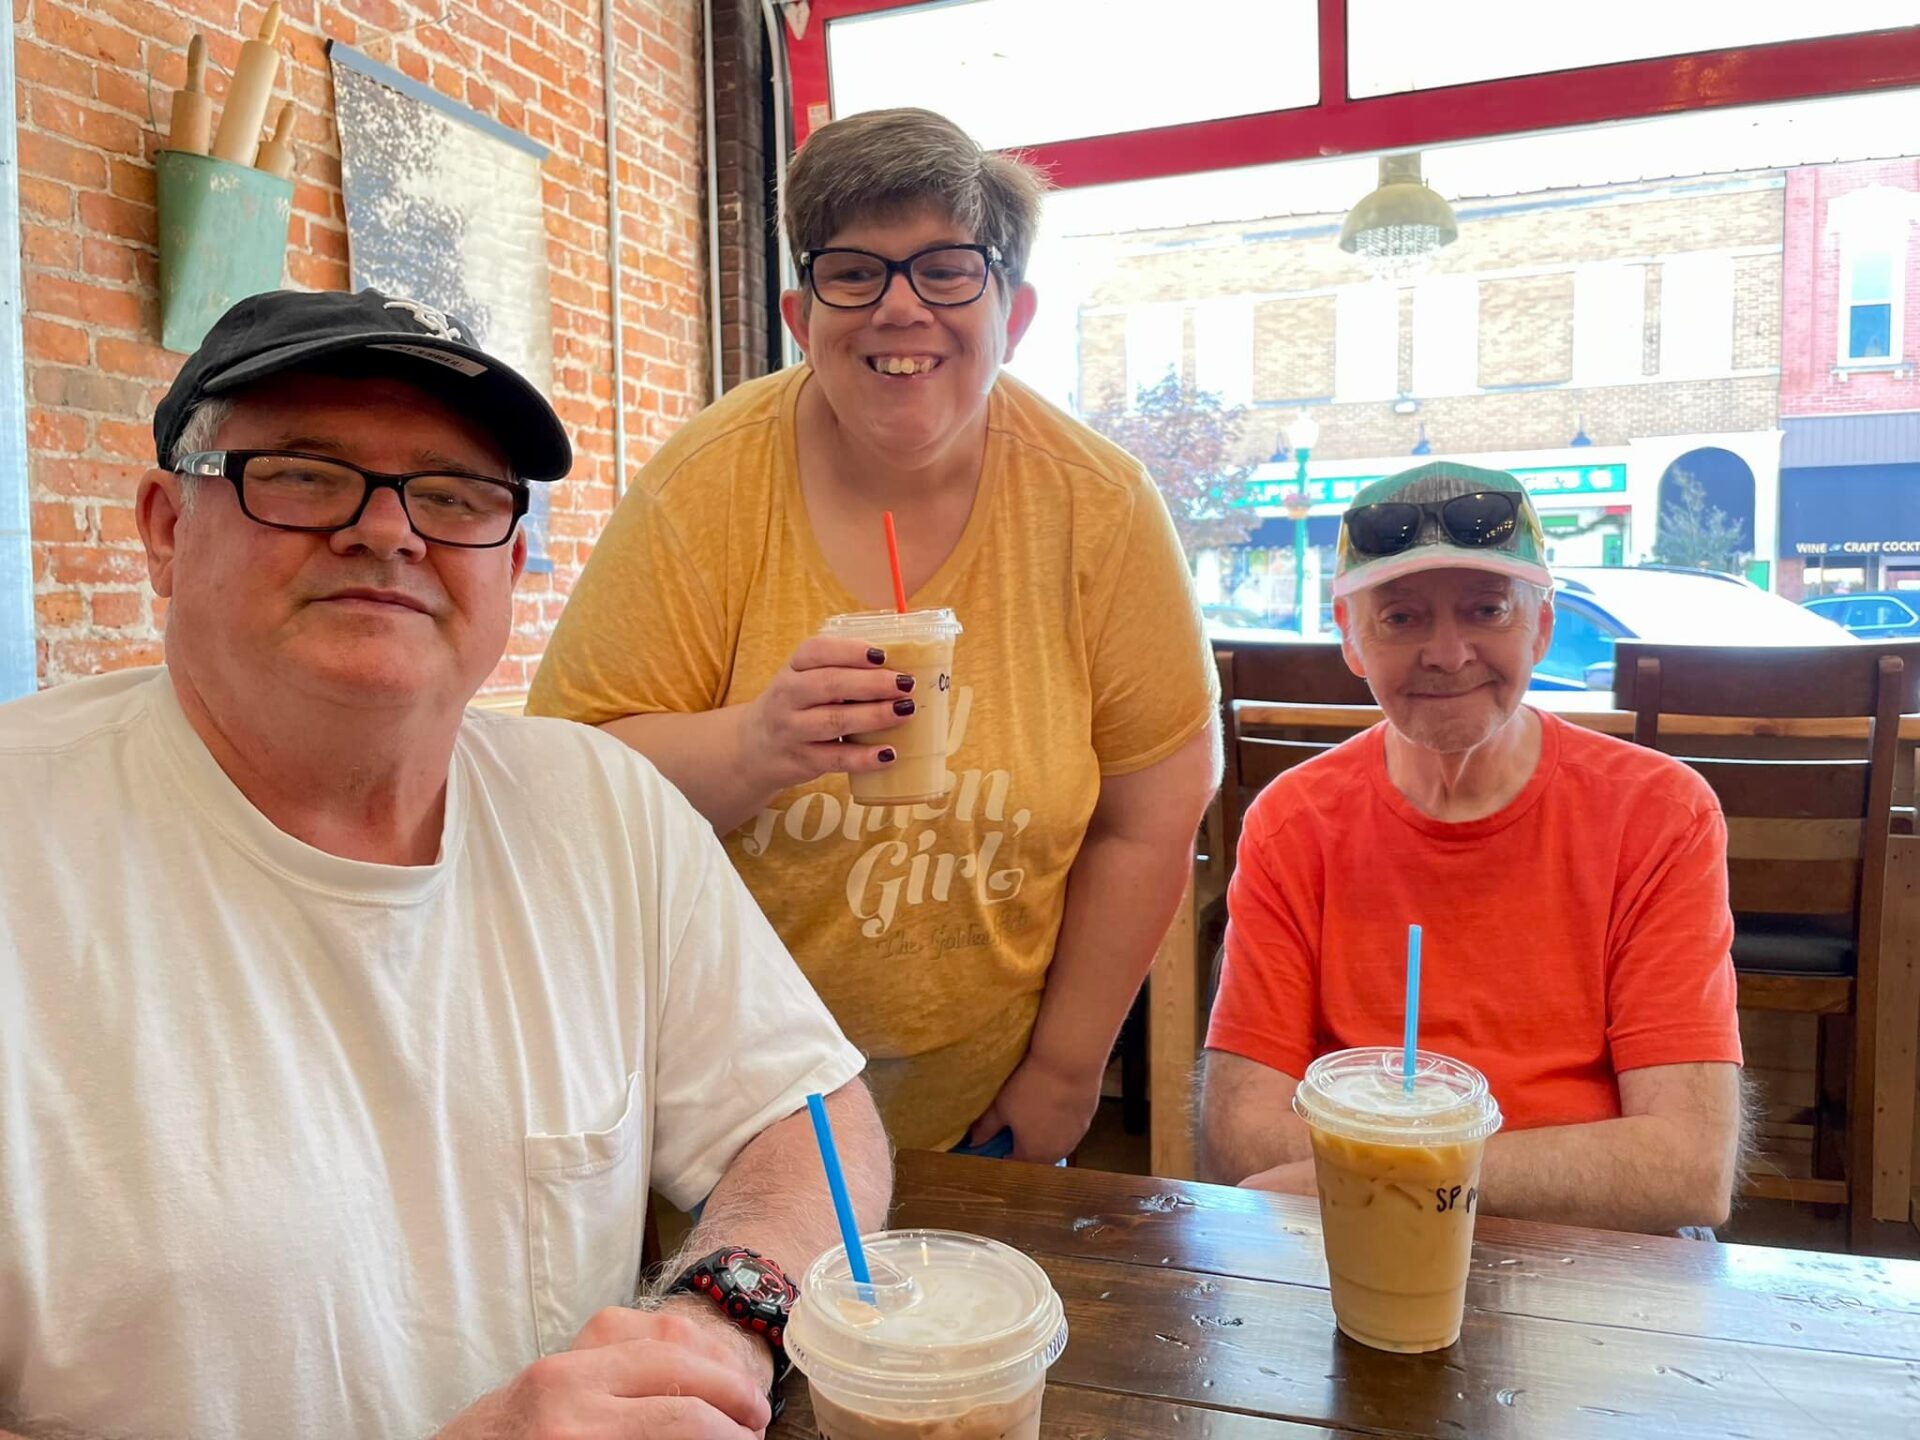 Enjoying a lovely afternoon with great company and delicious iced coffee!"